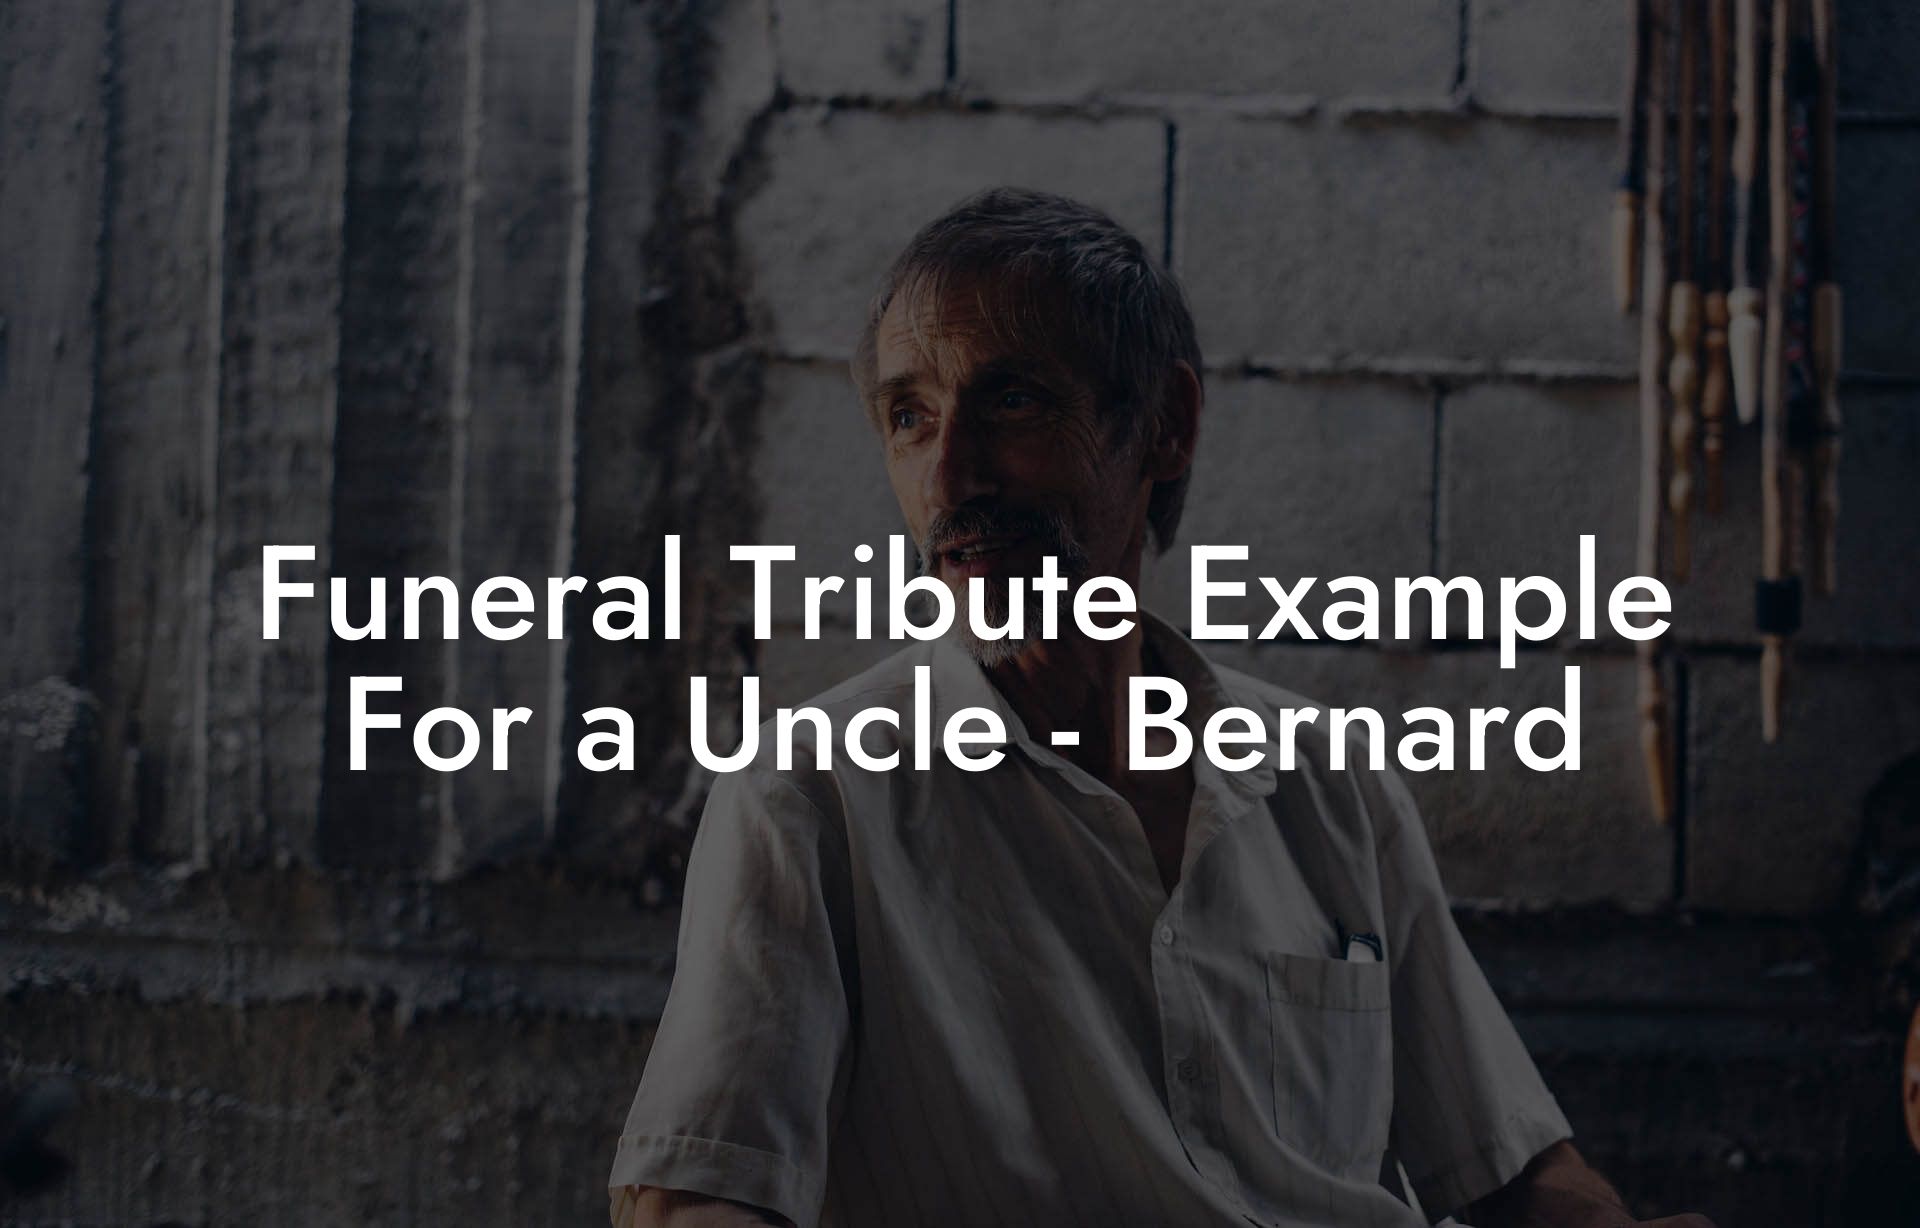 Funeral Tribute Example For a Uncle - Bernard